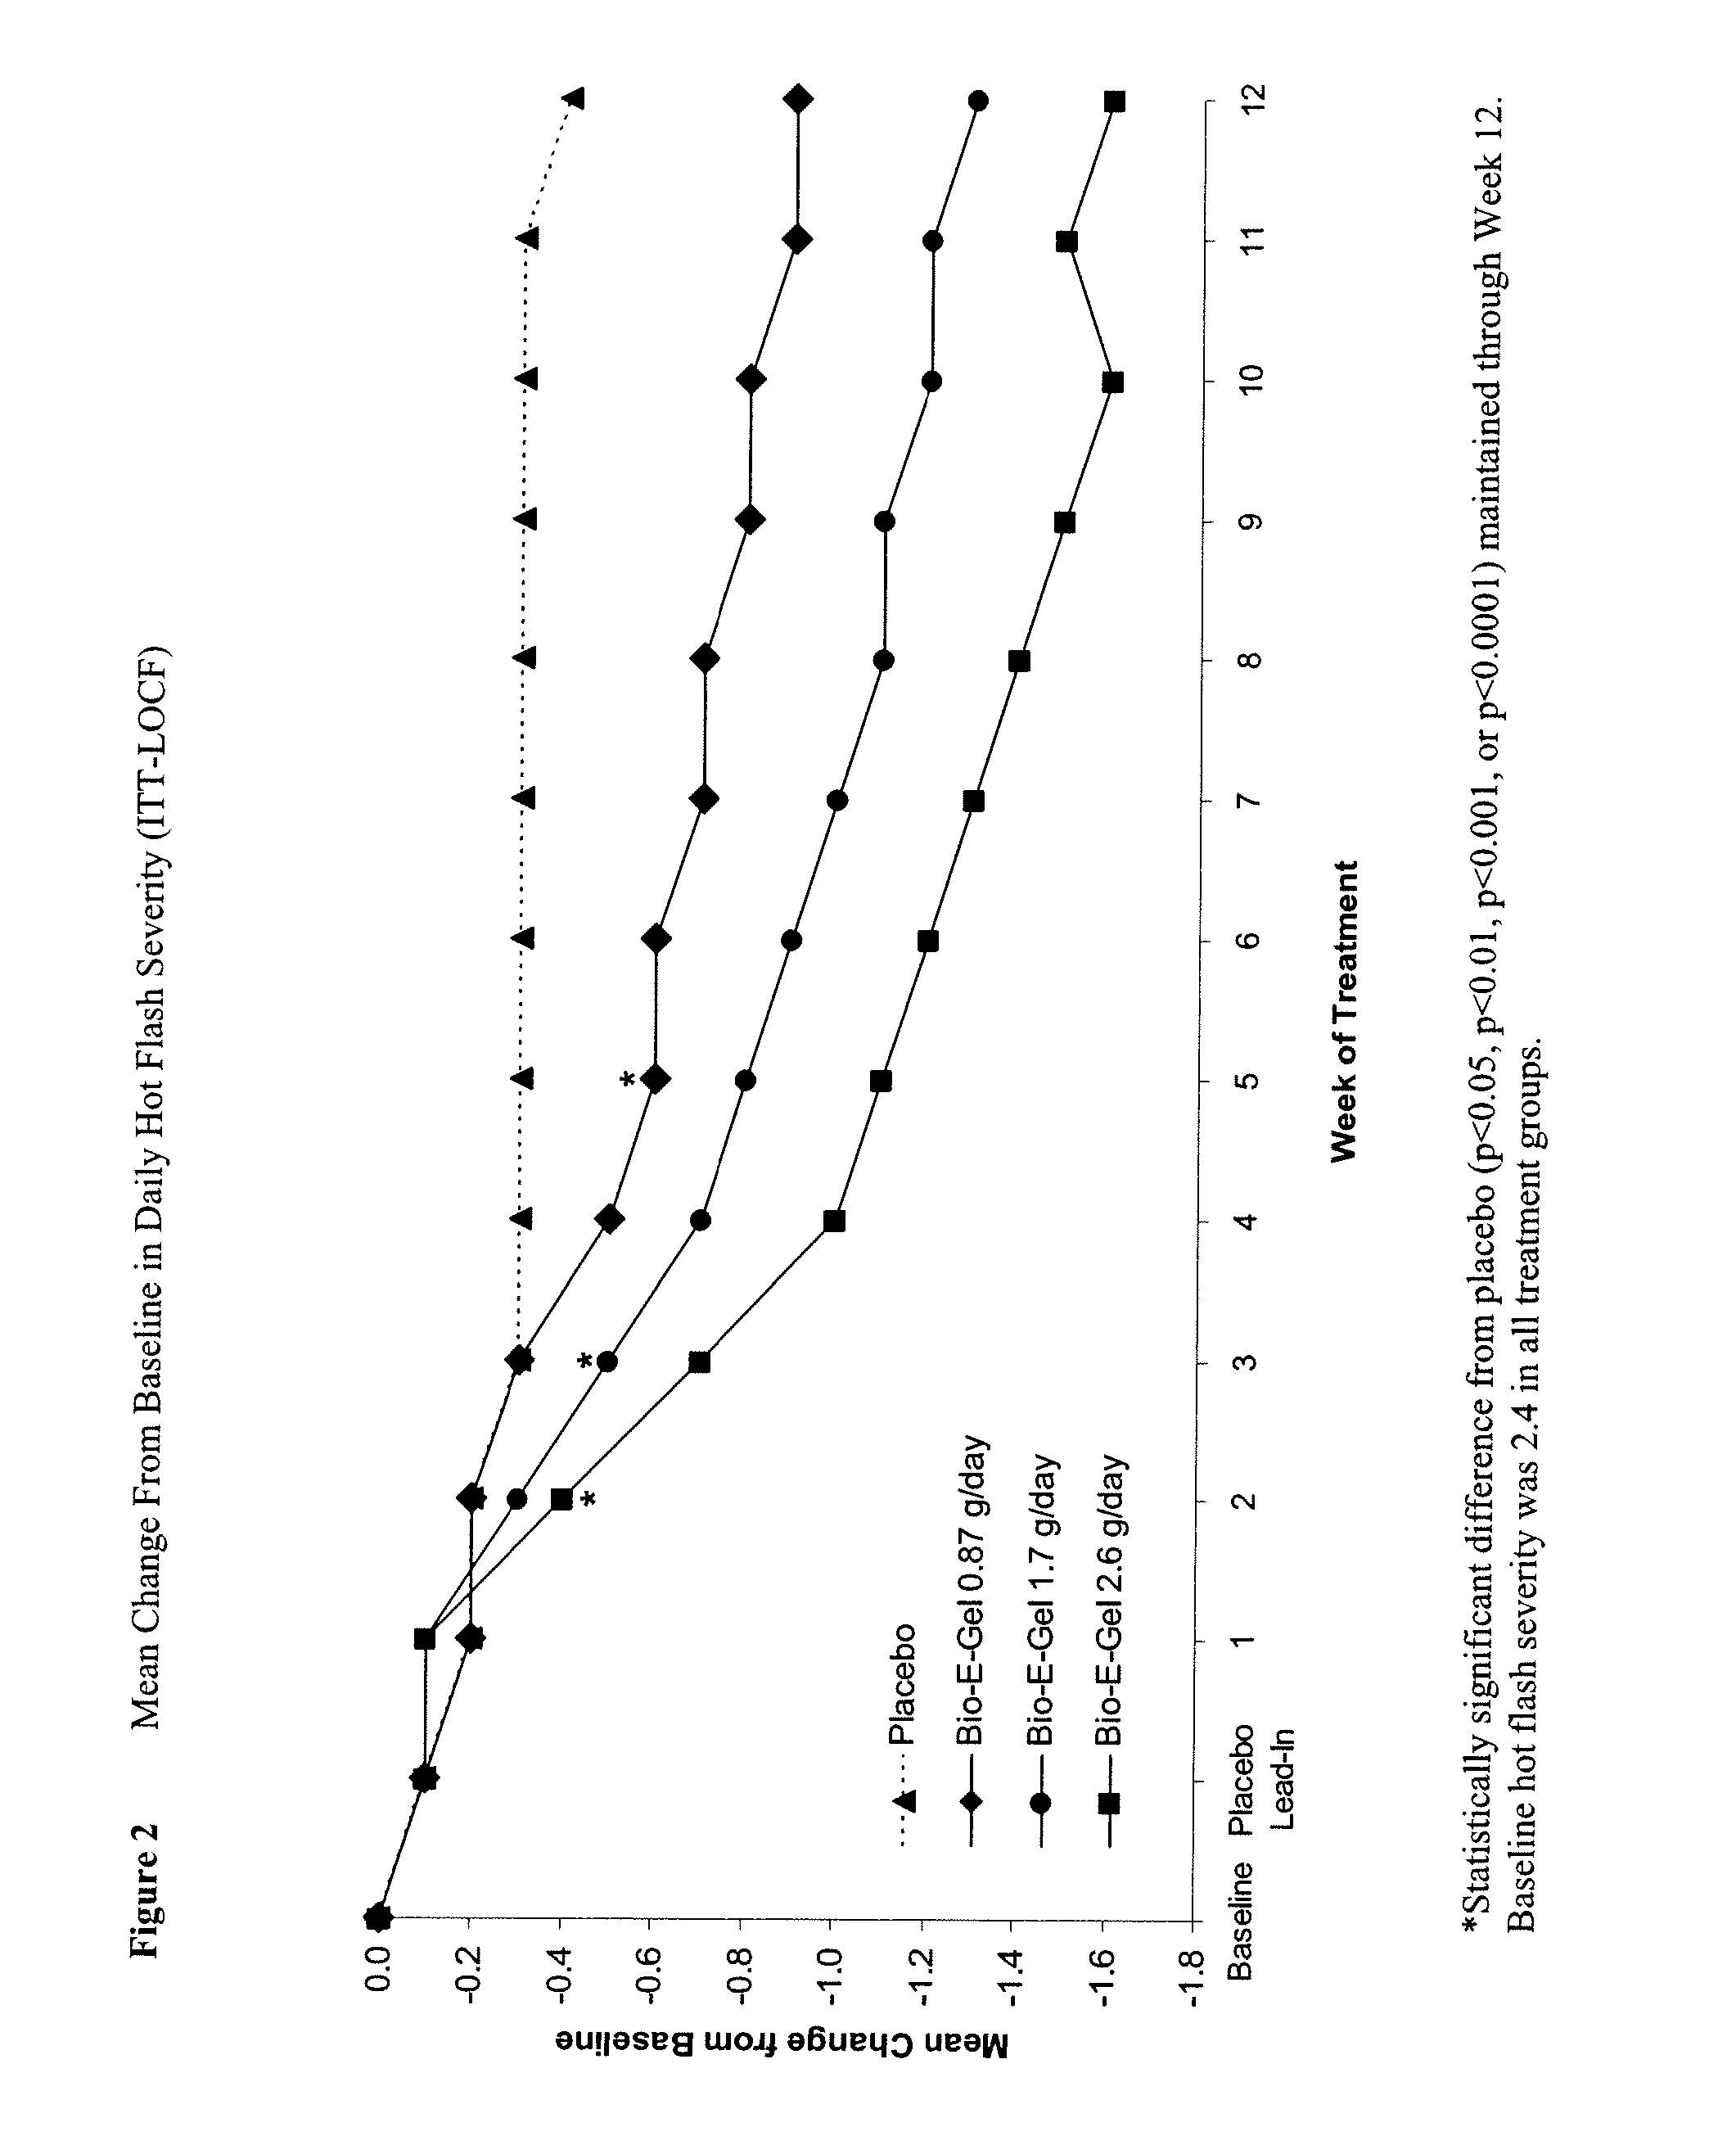 Methods of treating hot flashes with formulations for transdermal or transmucosal application